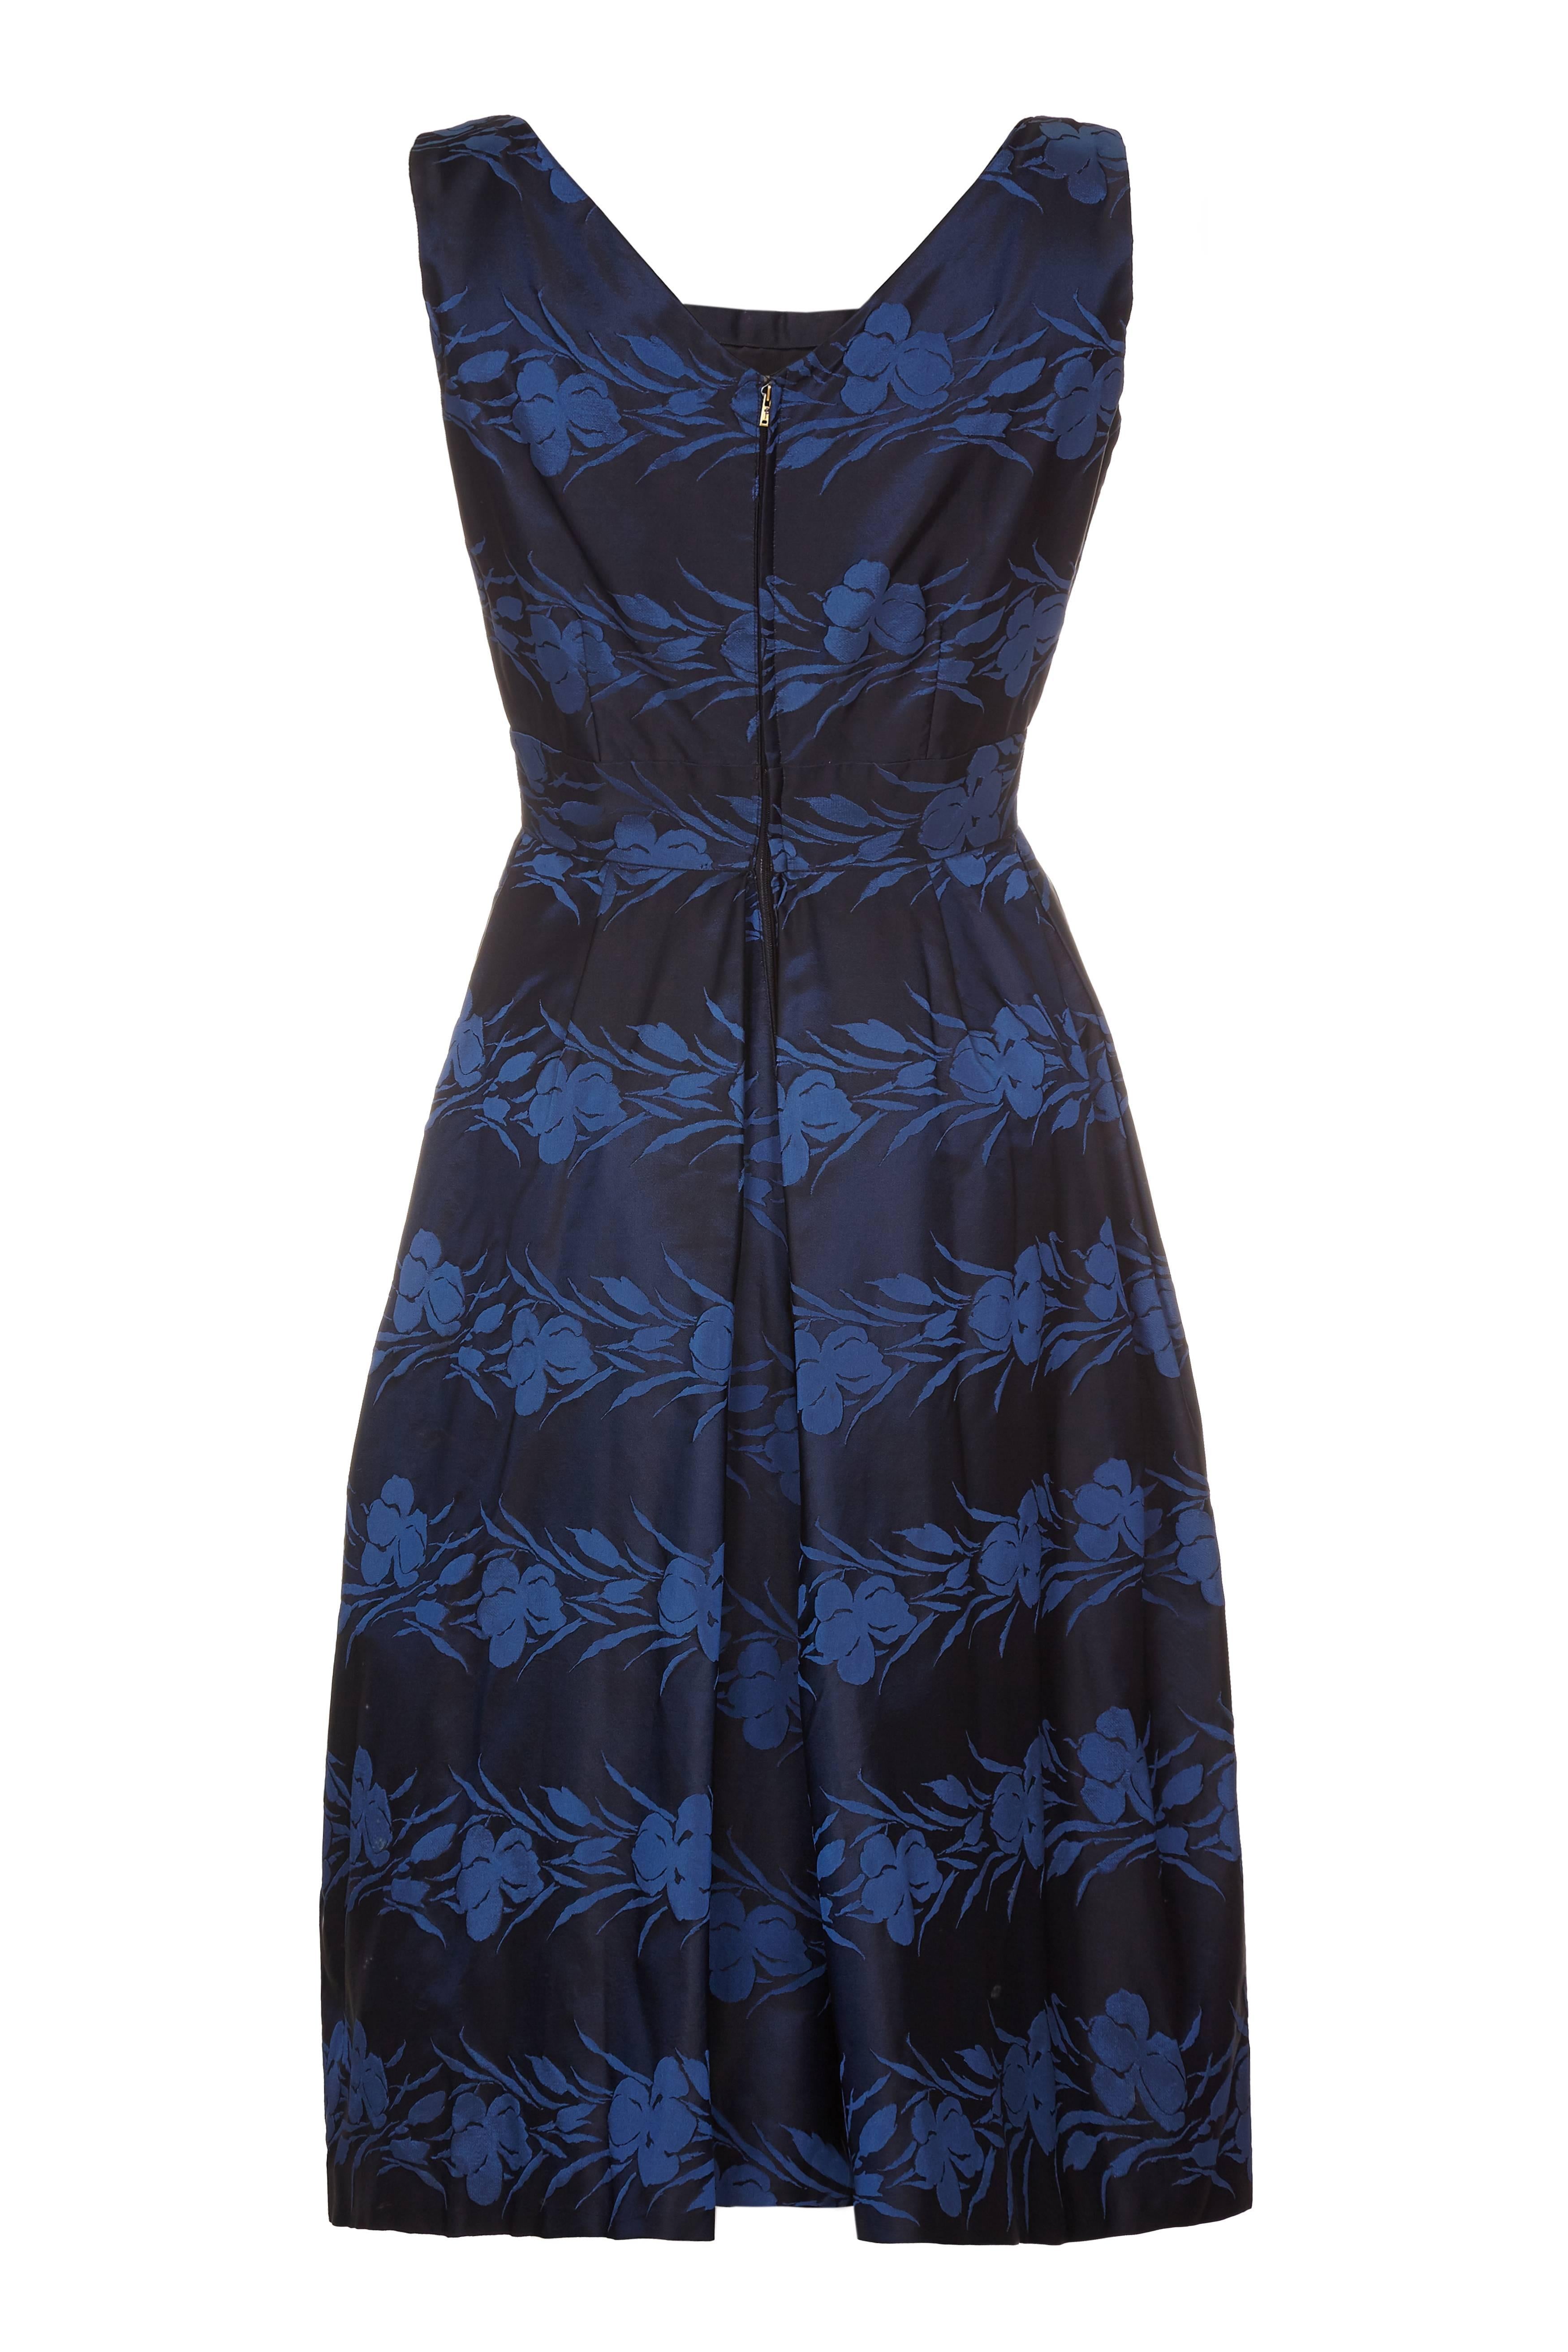 1950s Susan Small silk formal dress in a beautiful midnight blue and french blue floral print. Nipped in at the waist with a fabric rose and bow detail on the waist band, beautifully shaped and lined in a high quality cotton. Darted at the bust and